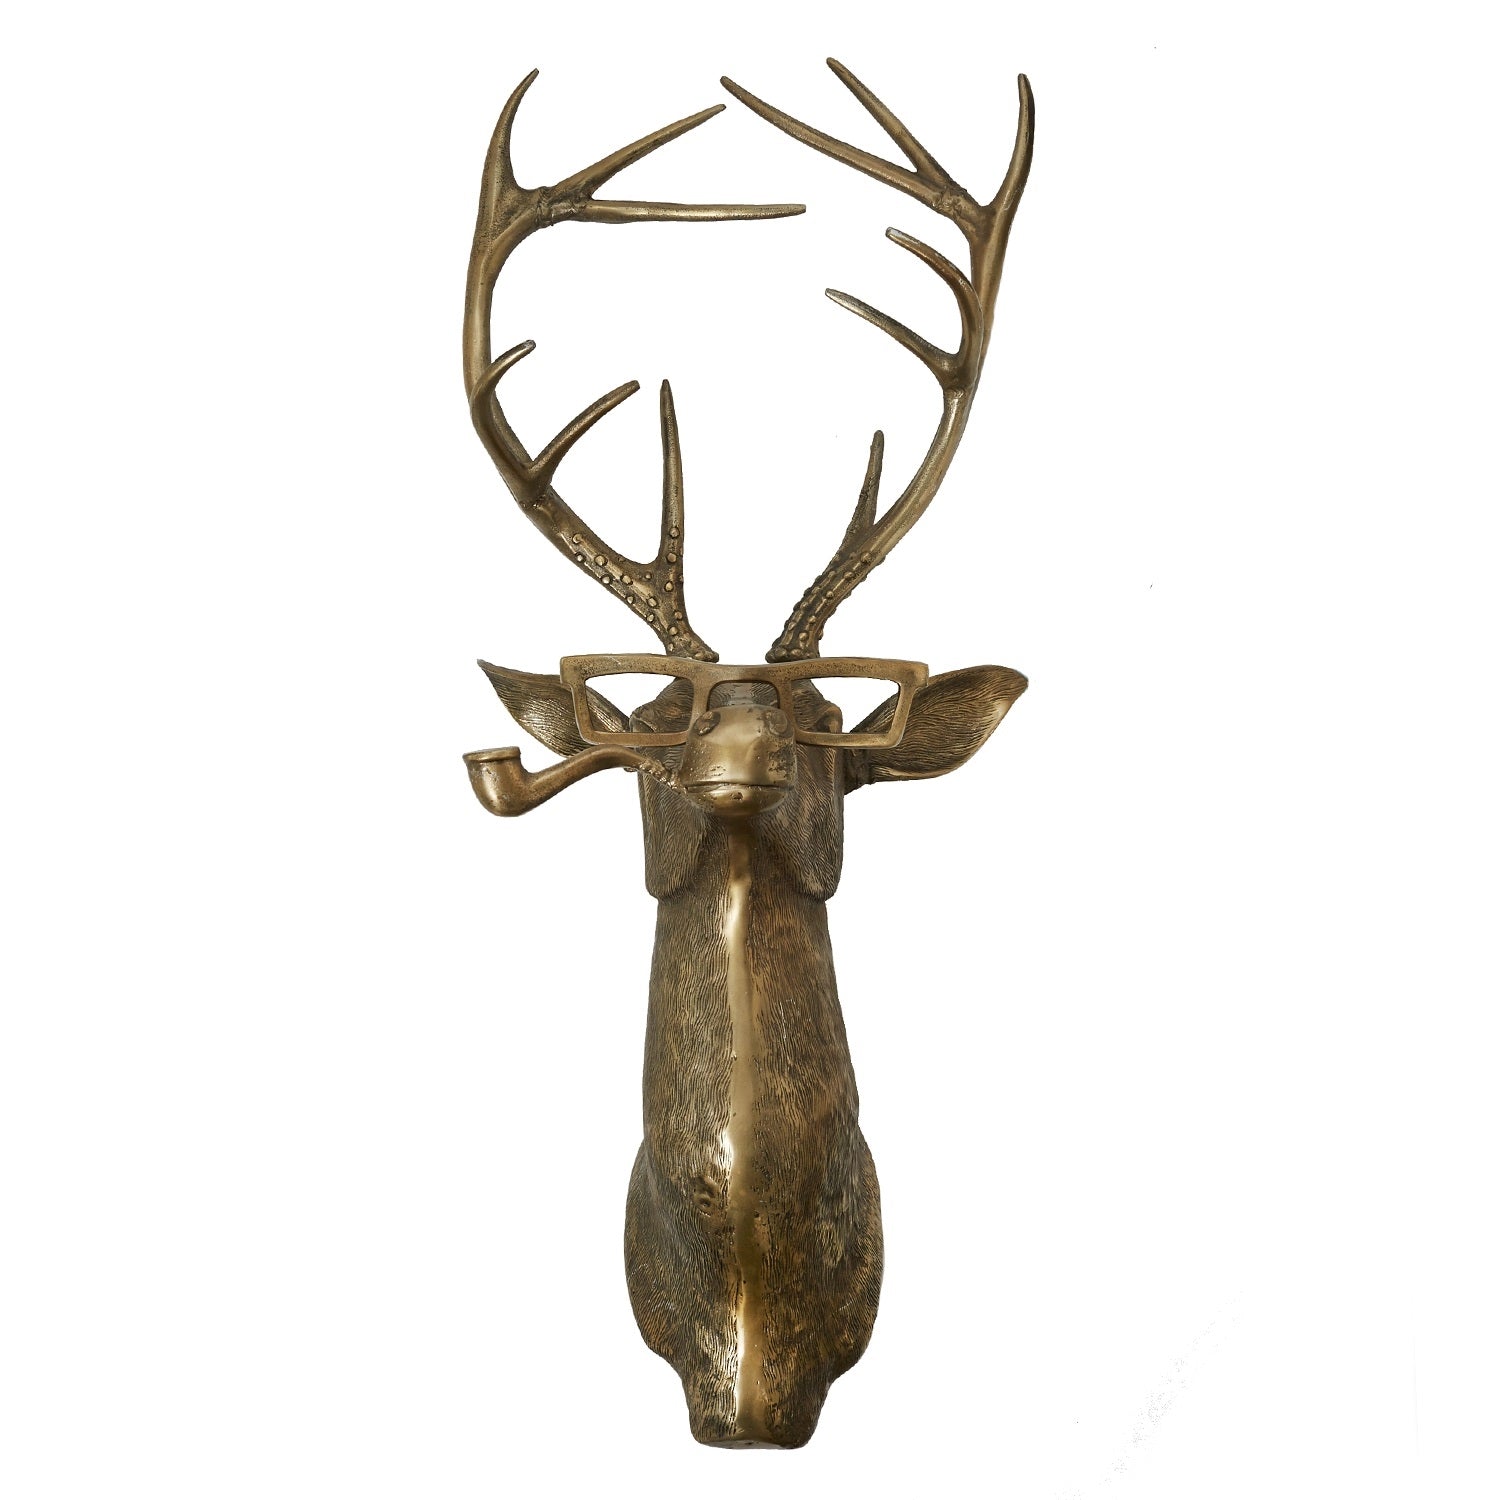 metal stag head in a brass finish smoking a pipe and wearing glasses